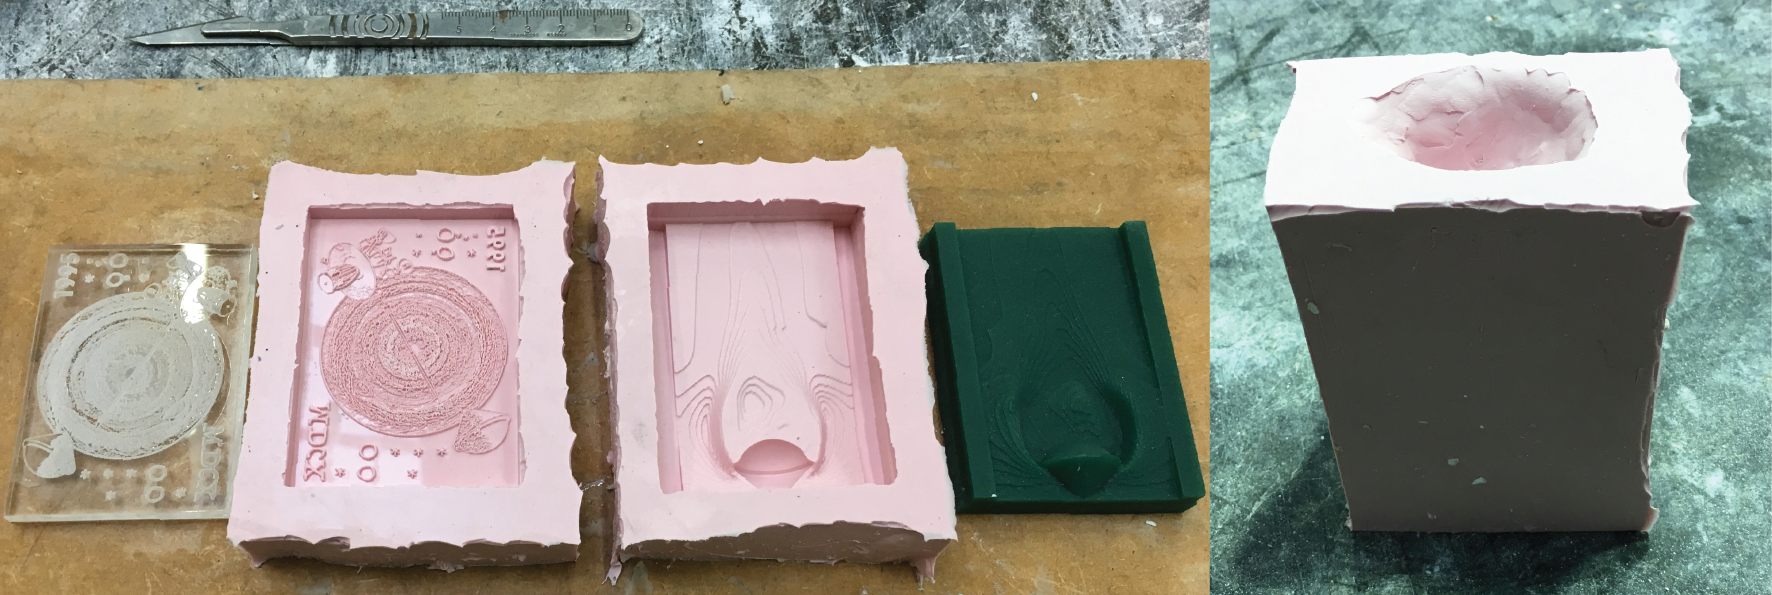 2 versions of the silicone mold